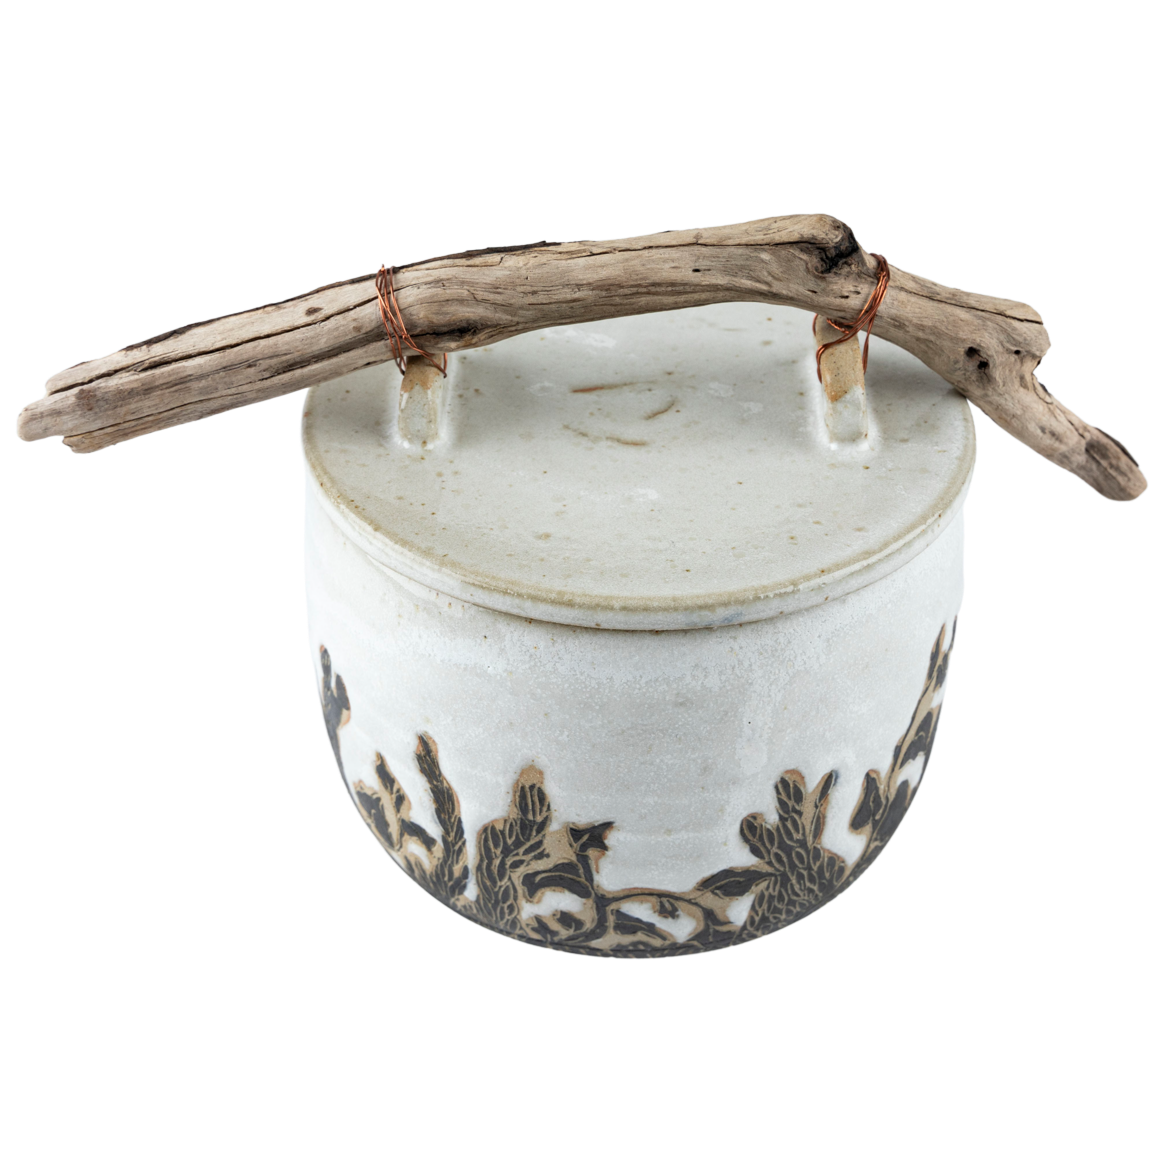 River Ceramics The Wild Ones Cannister with Driftwood Handle Design 5